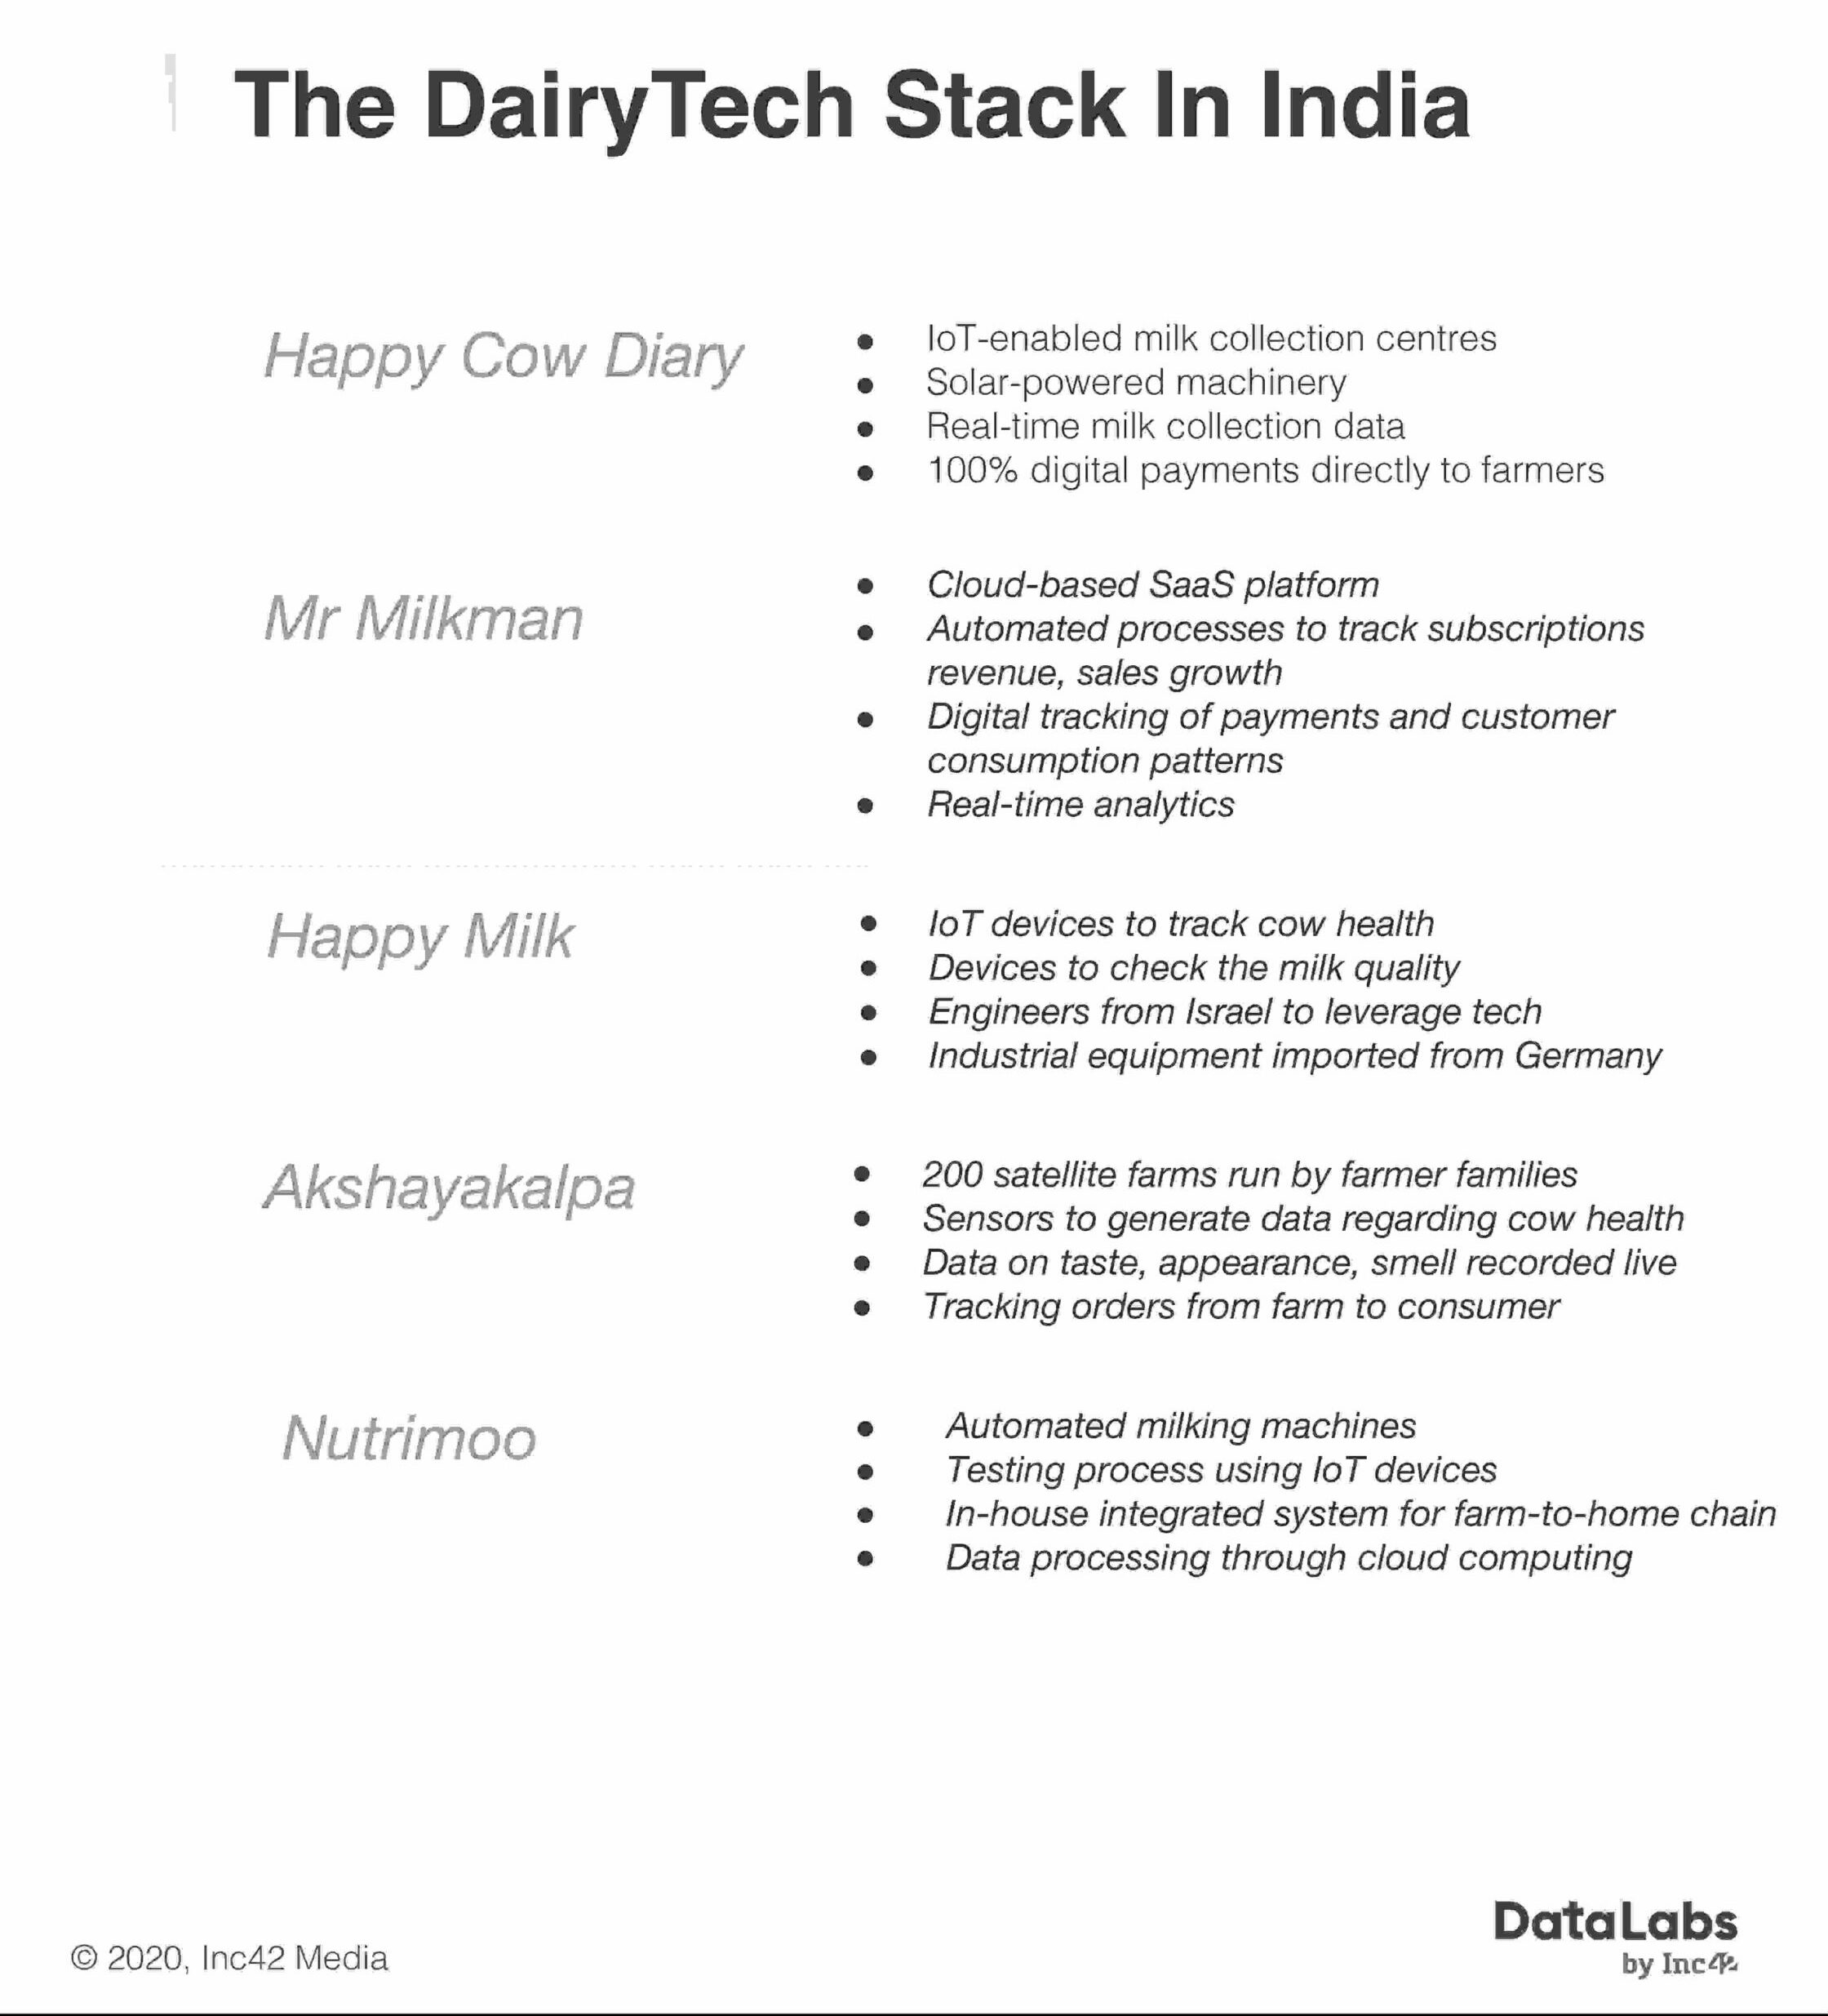 White Revolution 2.0: Dairy Tech Startups Rise On India’s Cow-Friendly Policies